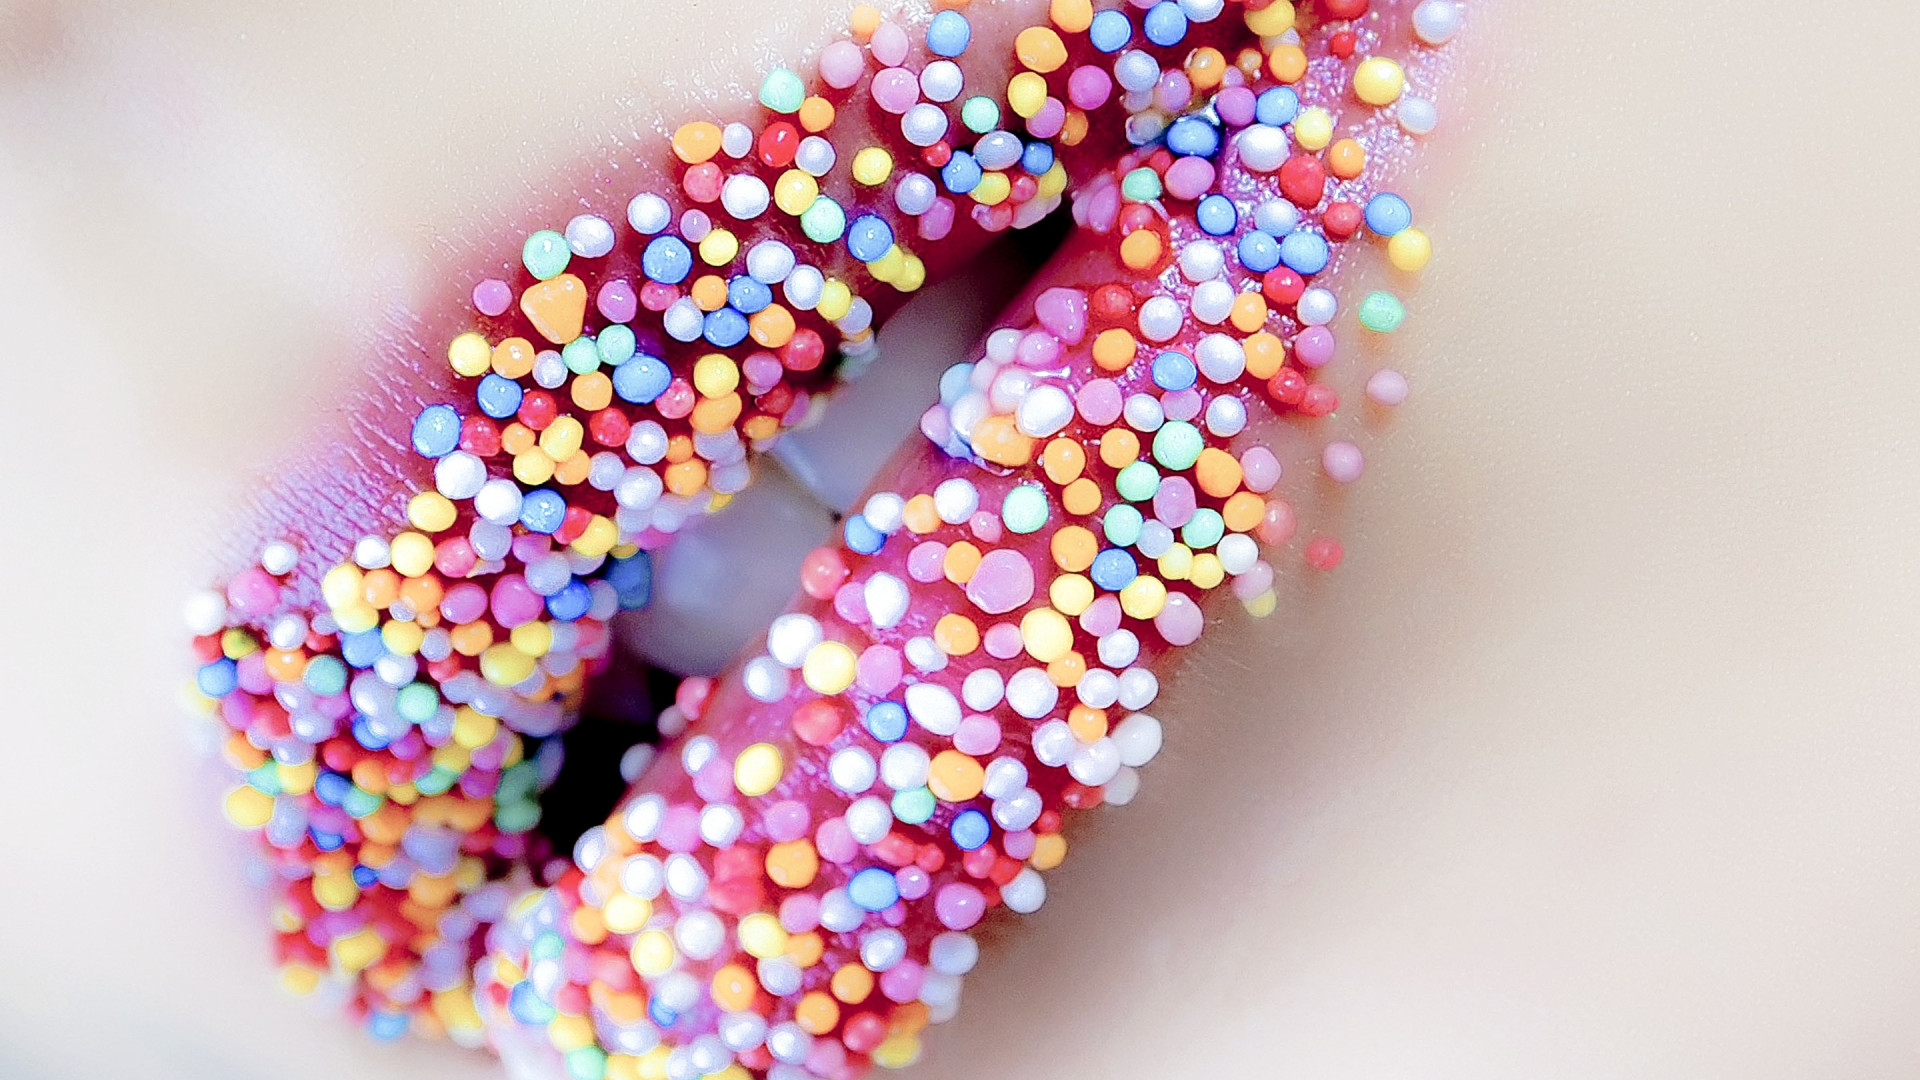 Lips with sweets wallpaper 1920x1080